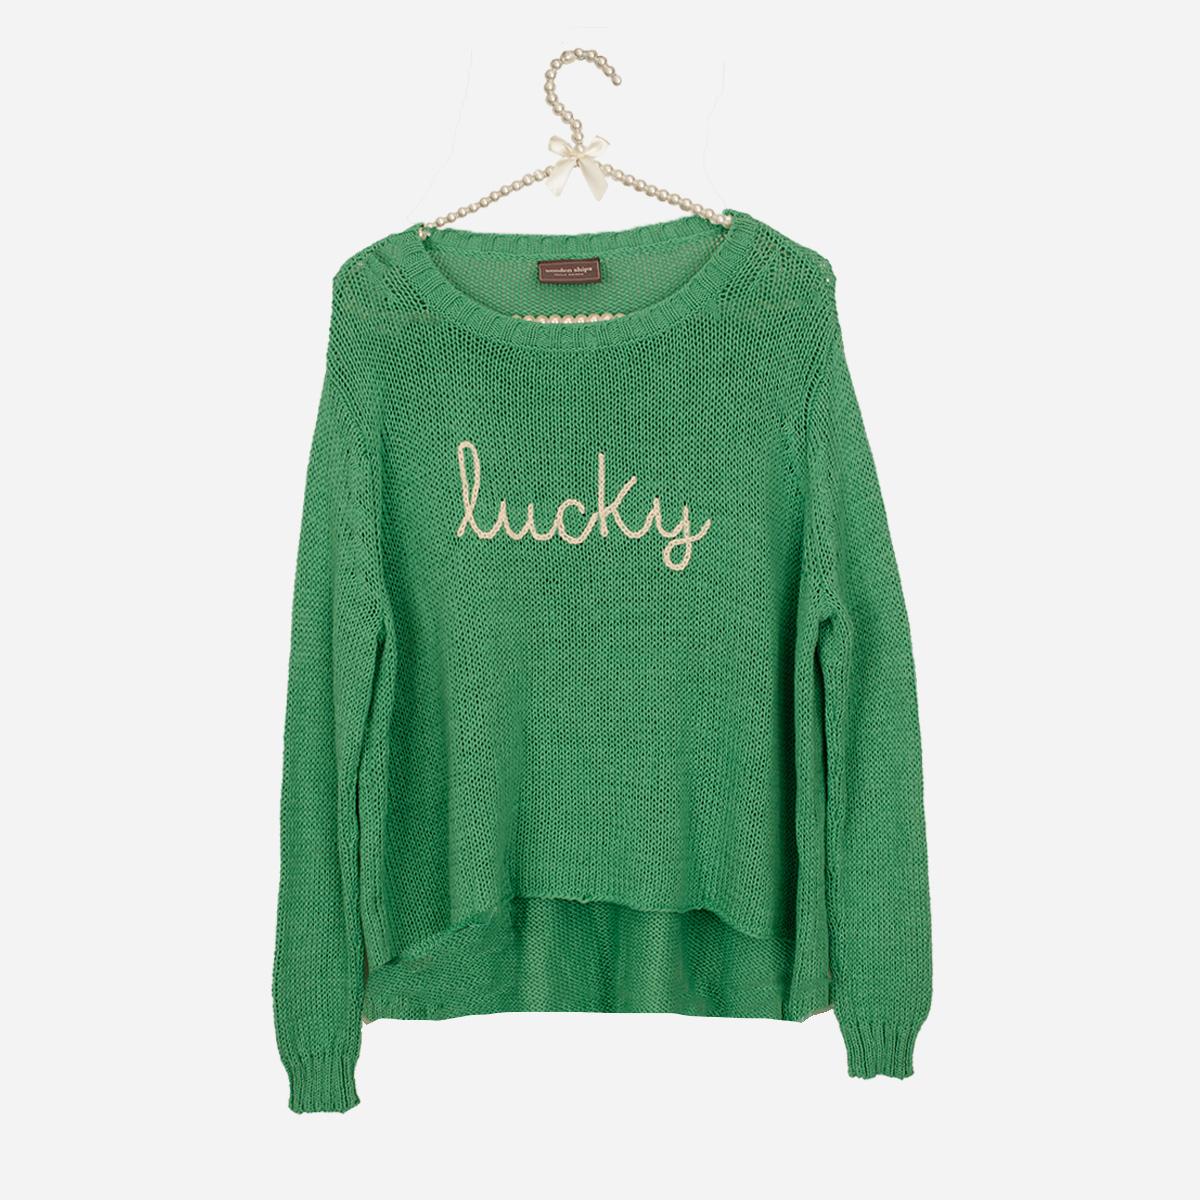 Green lucky sweater by wooden ships, Paola Buendía